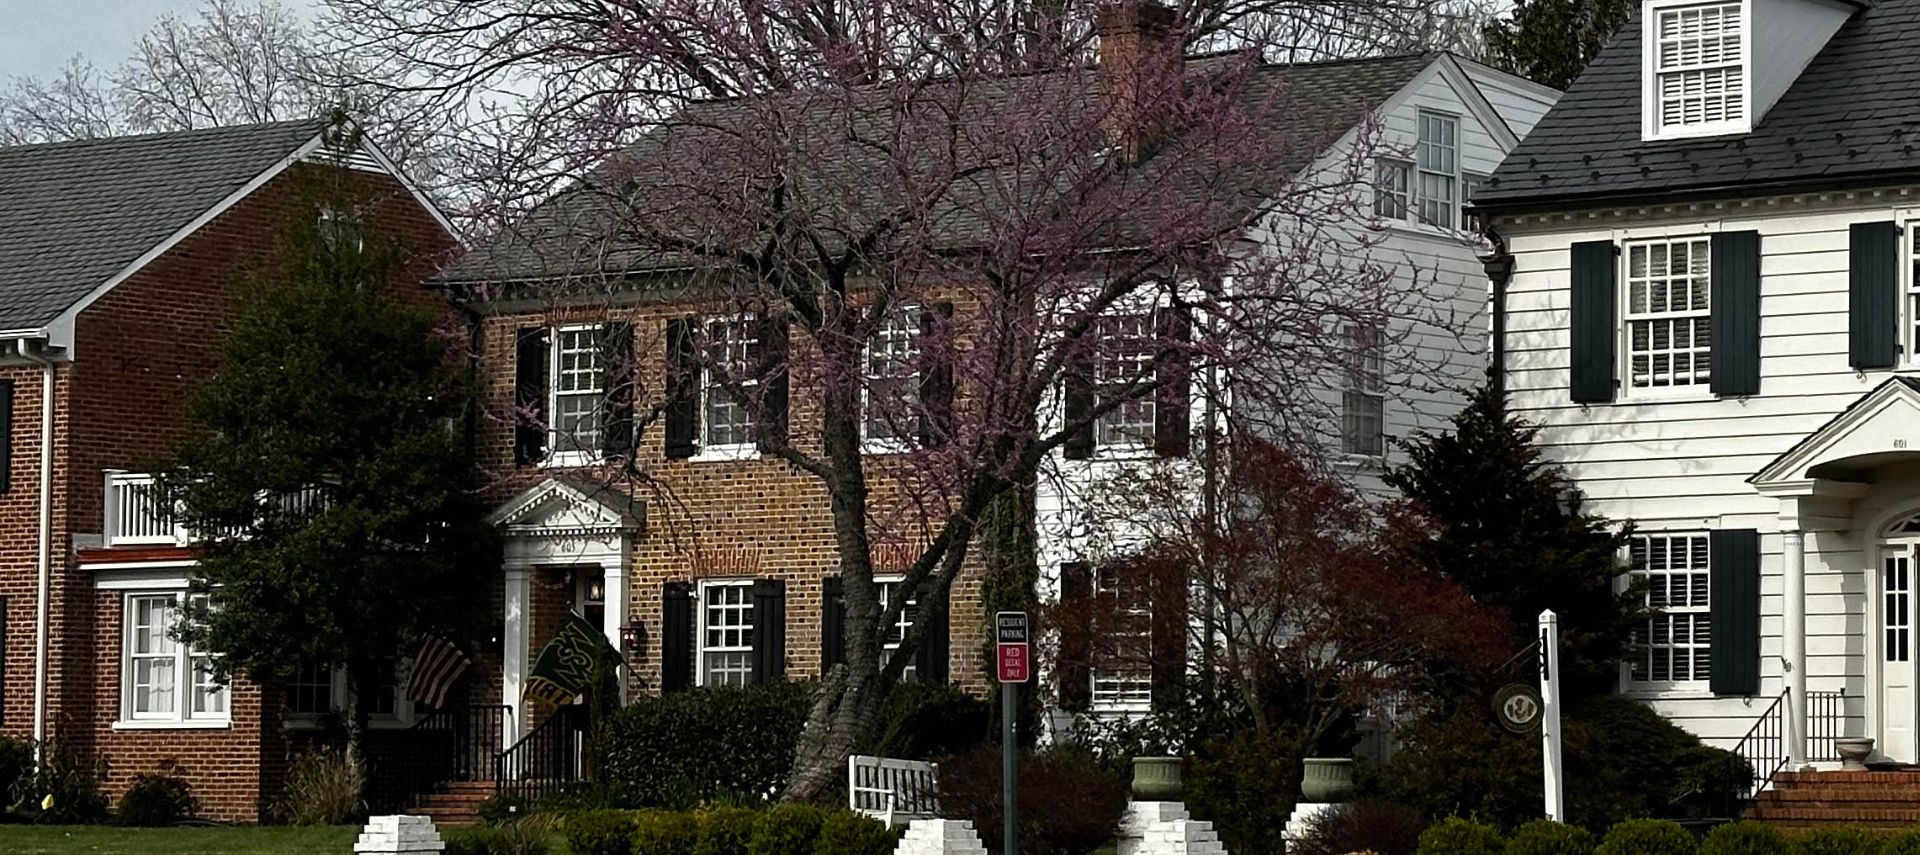 Exterior view of a large, stately brick home with several windows with black shutters, flanked by other homes and large trees in the front yard.